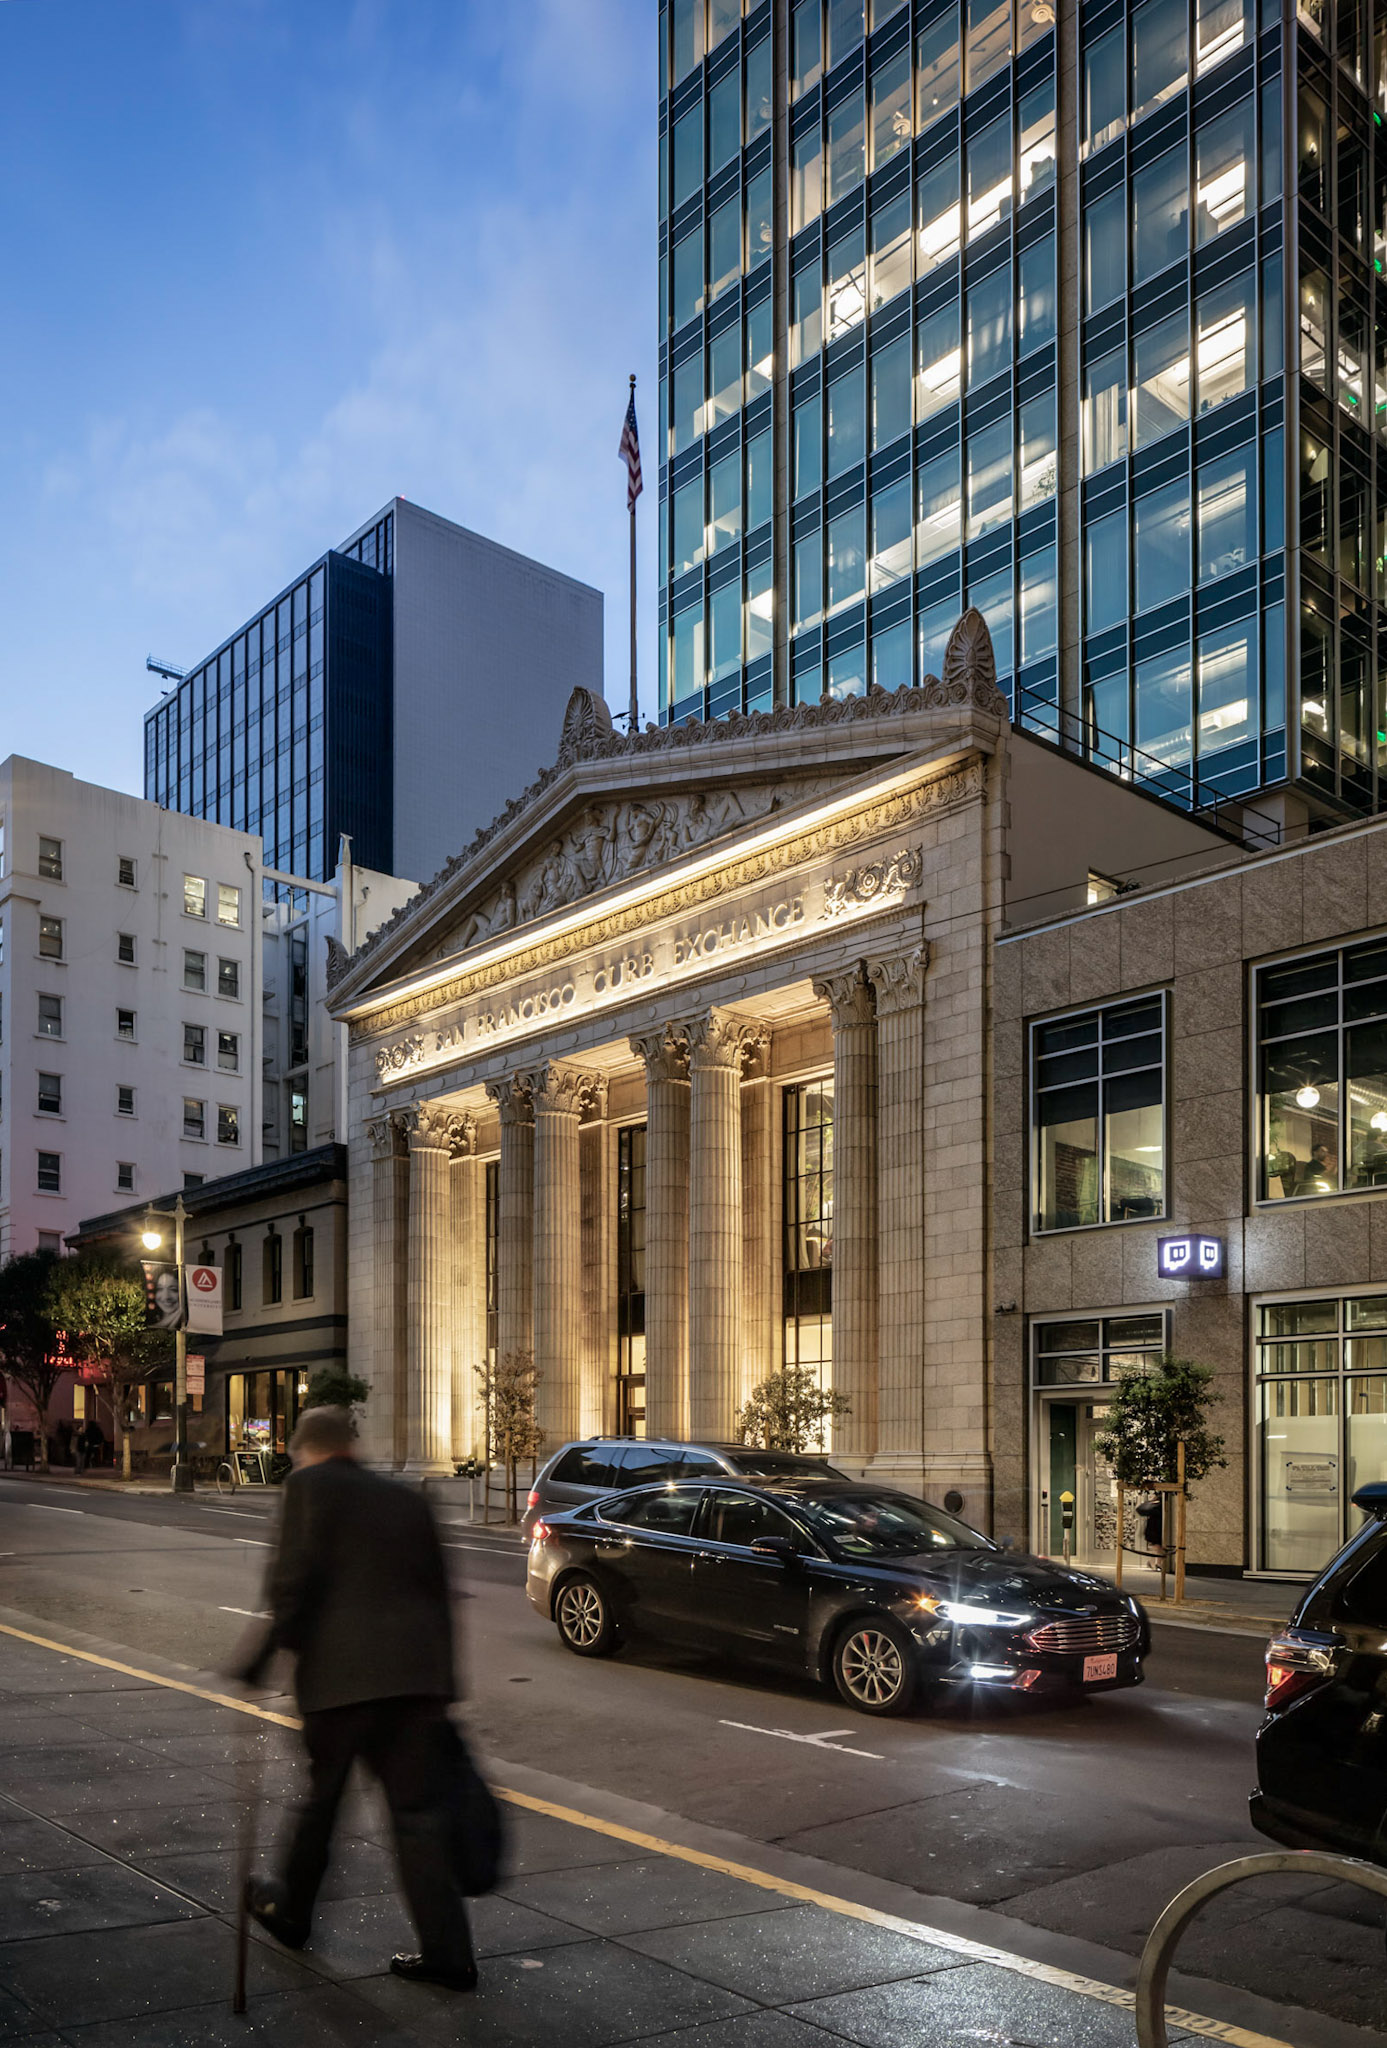 350 Bush Street/Historic Mining Exchange. Architecturally integrated façade lighting highlights the columns and building name at the historic Mining Exchange. © Scott Hargis